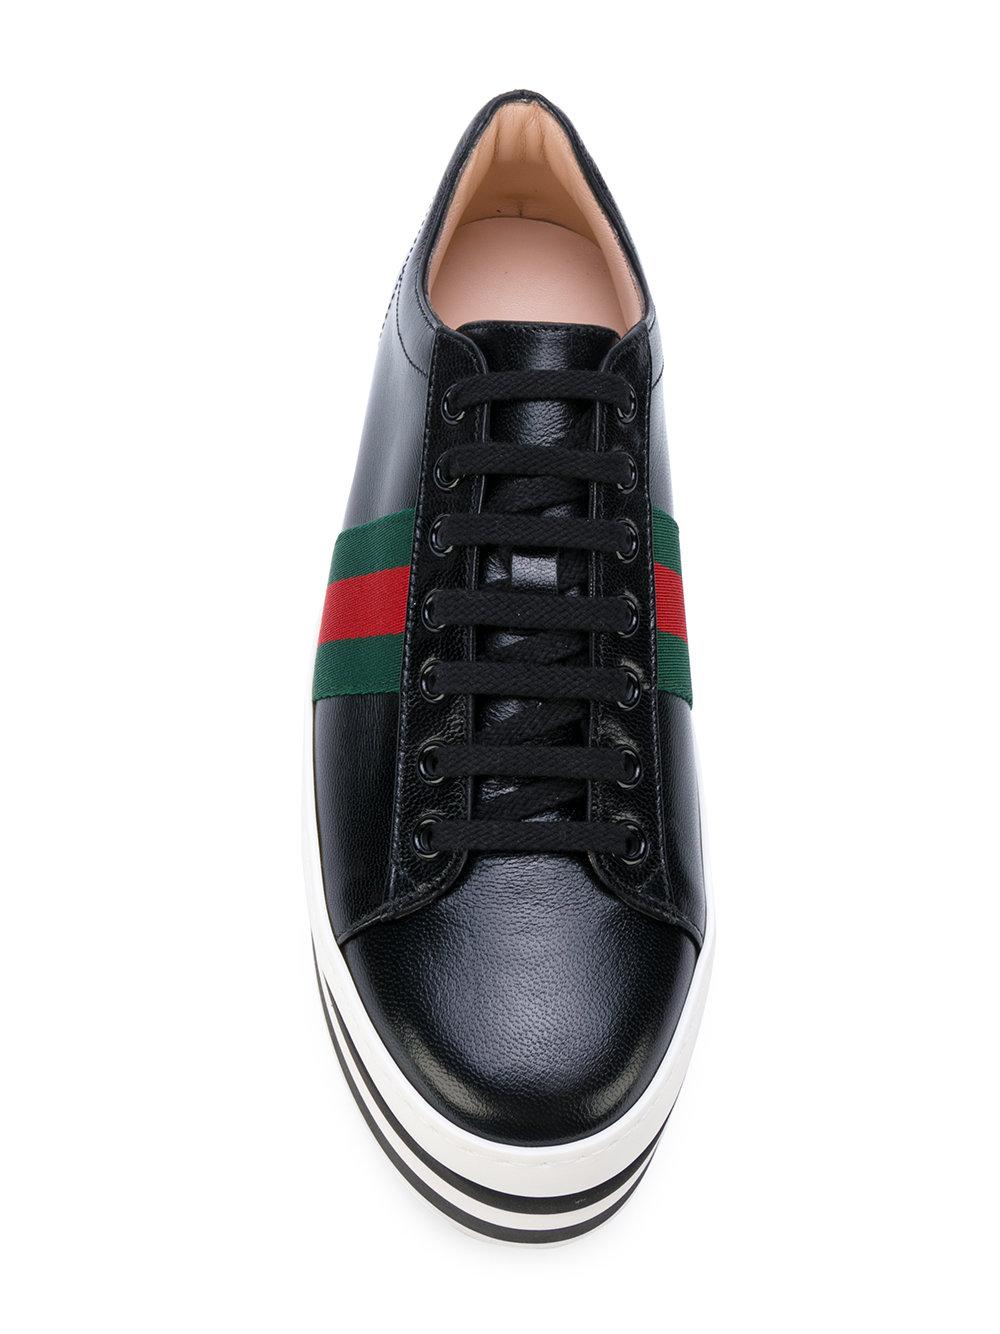 Gucci Leather Platform Sneakers in Black | Lyst